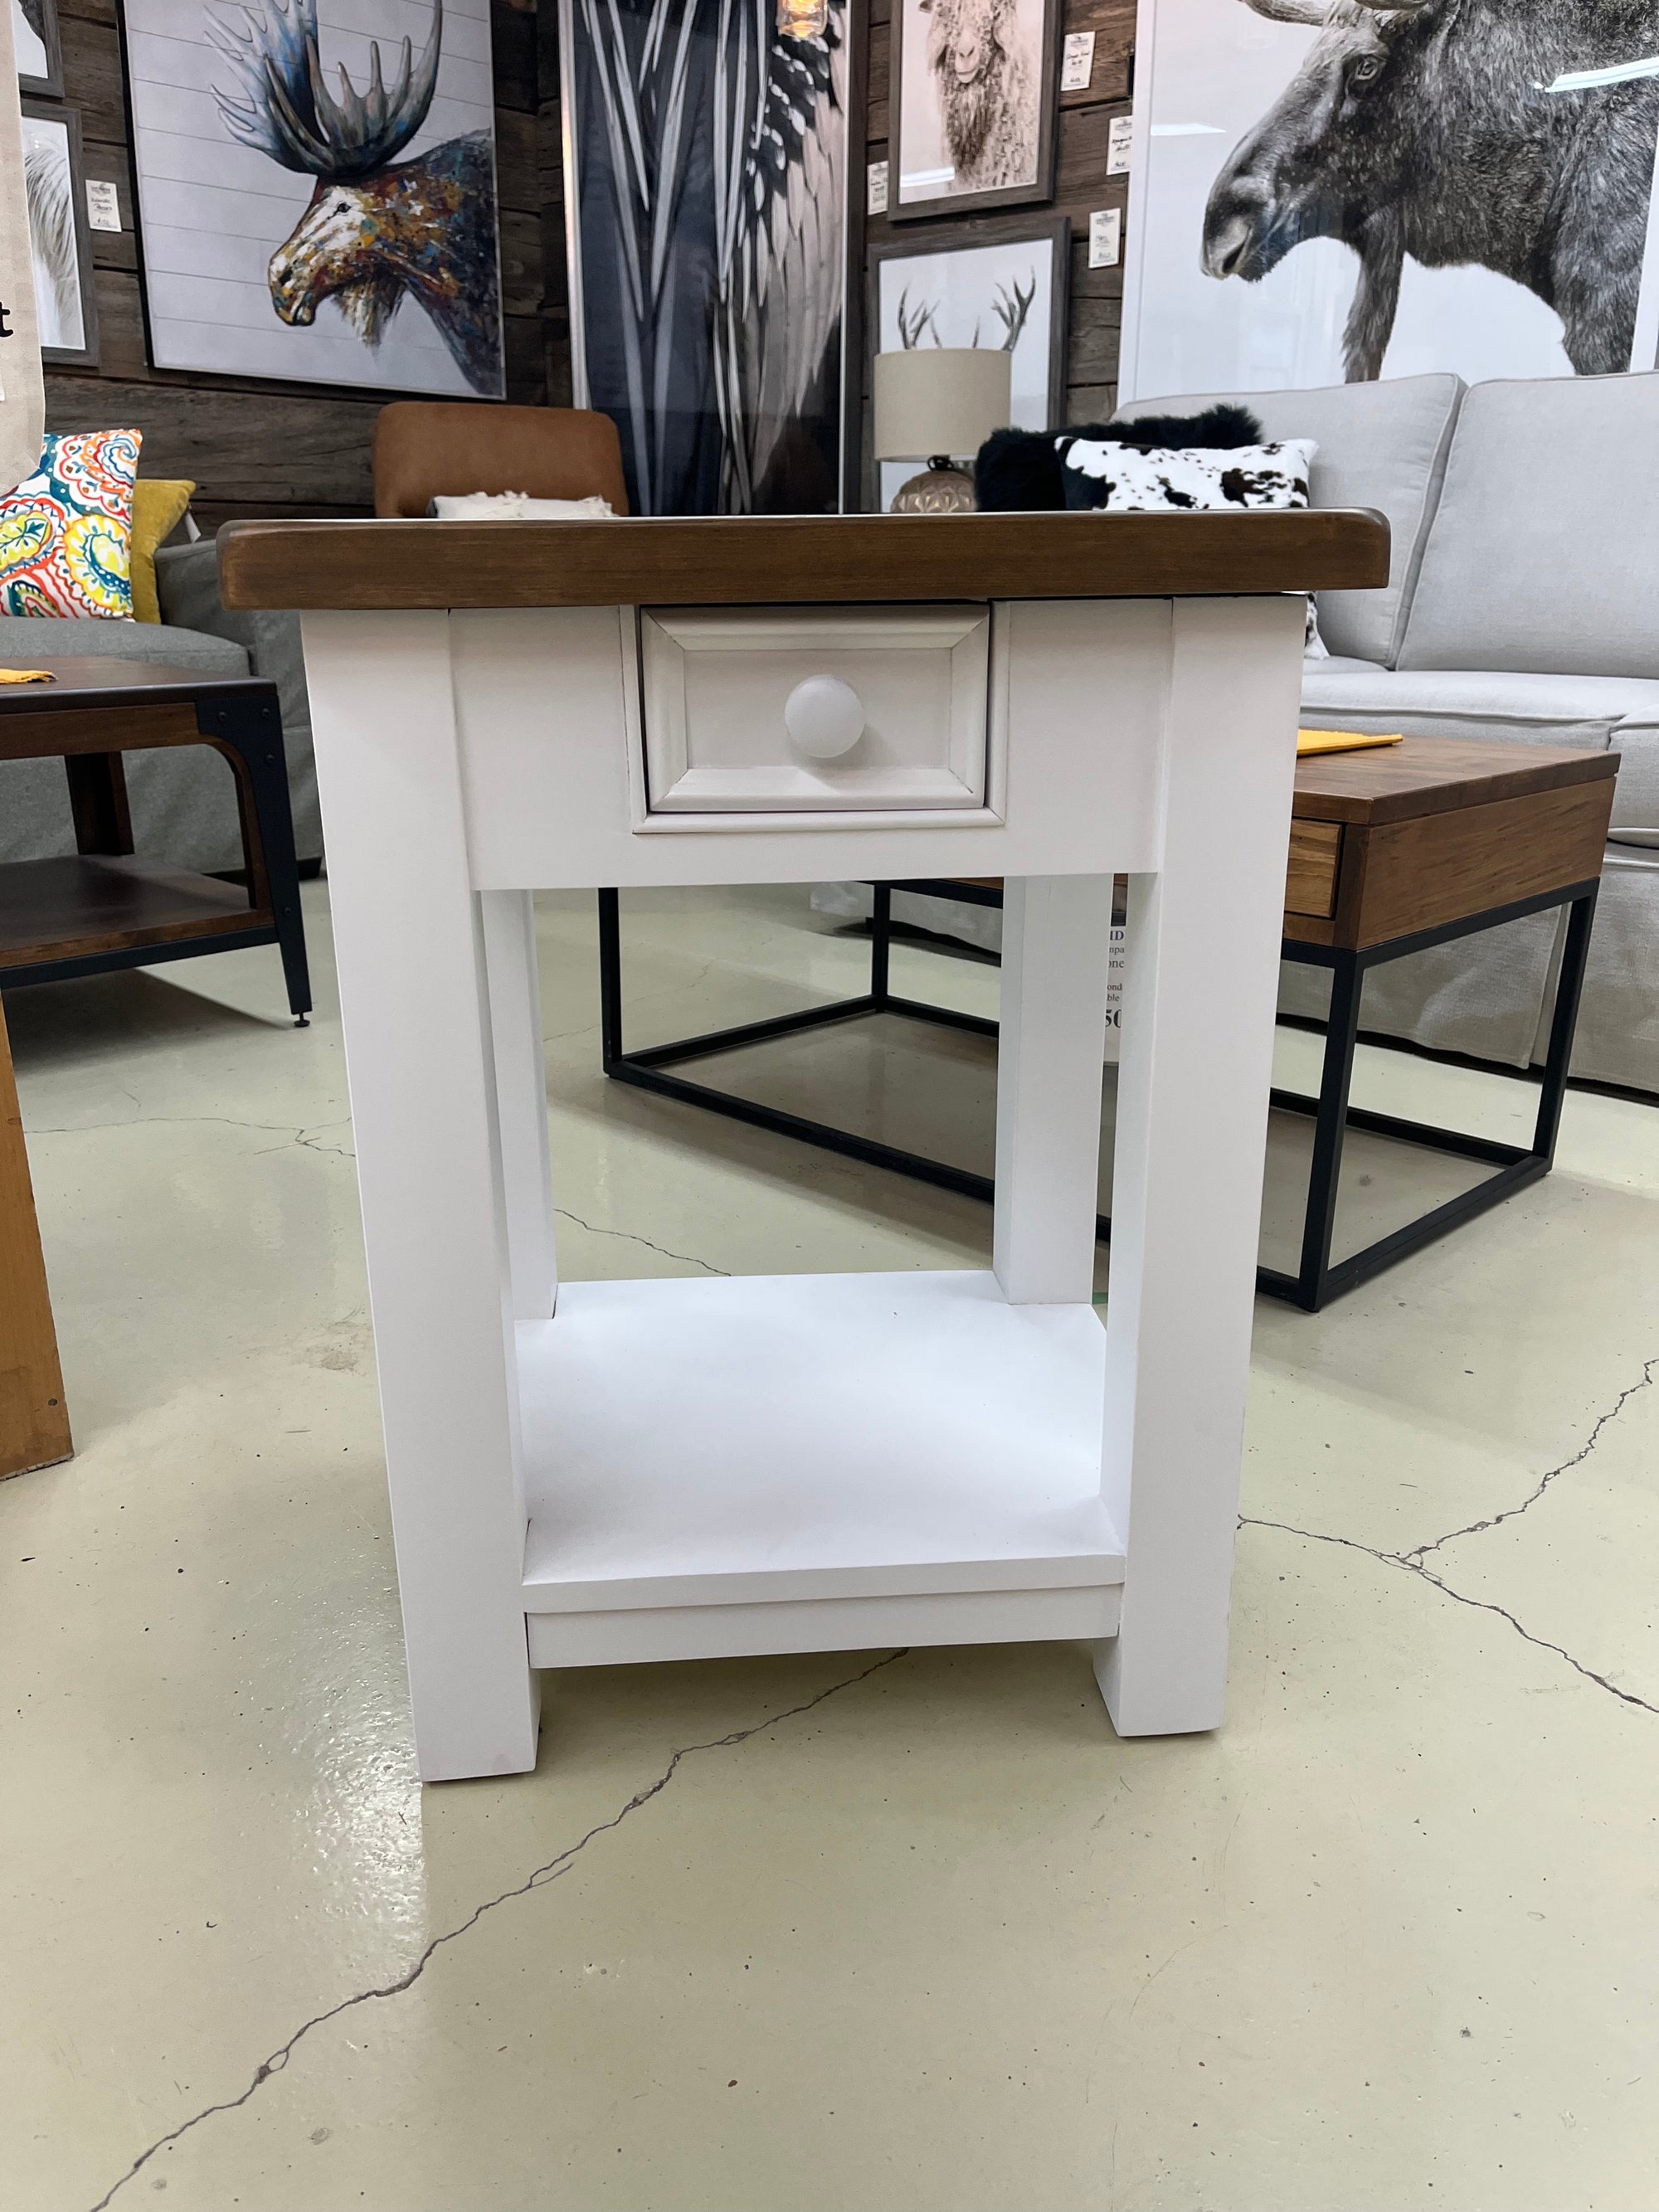 Pierre & Clair Small End Table With Shelf